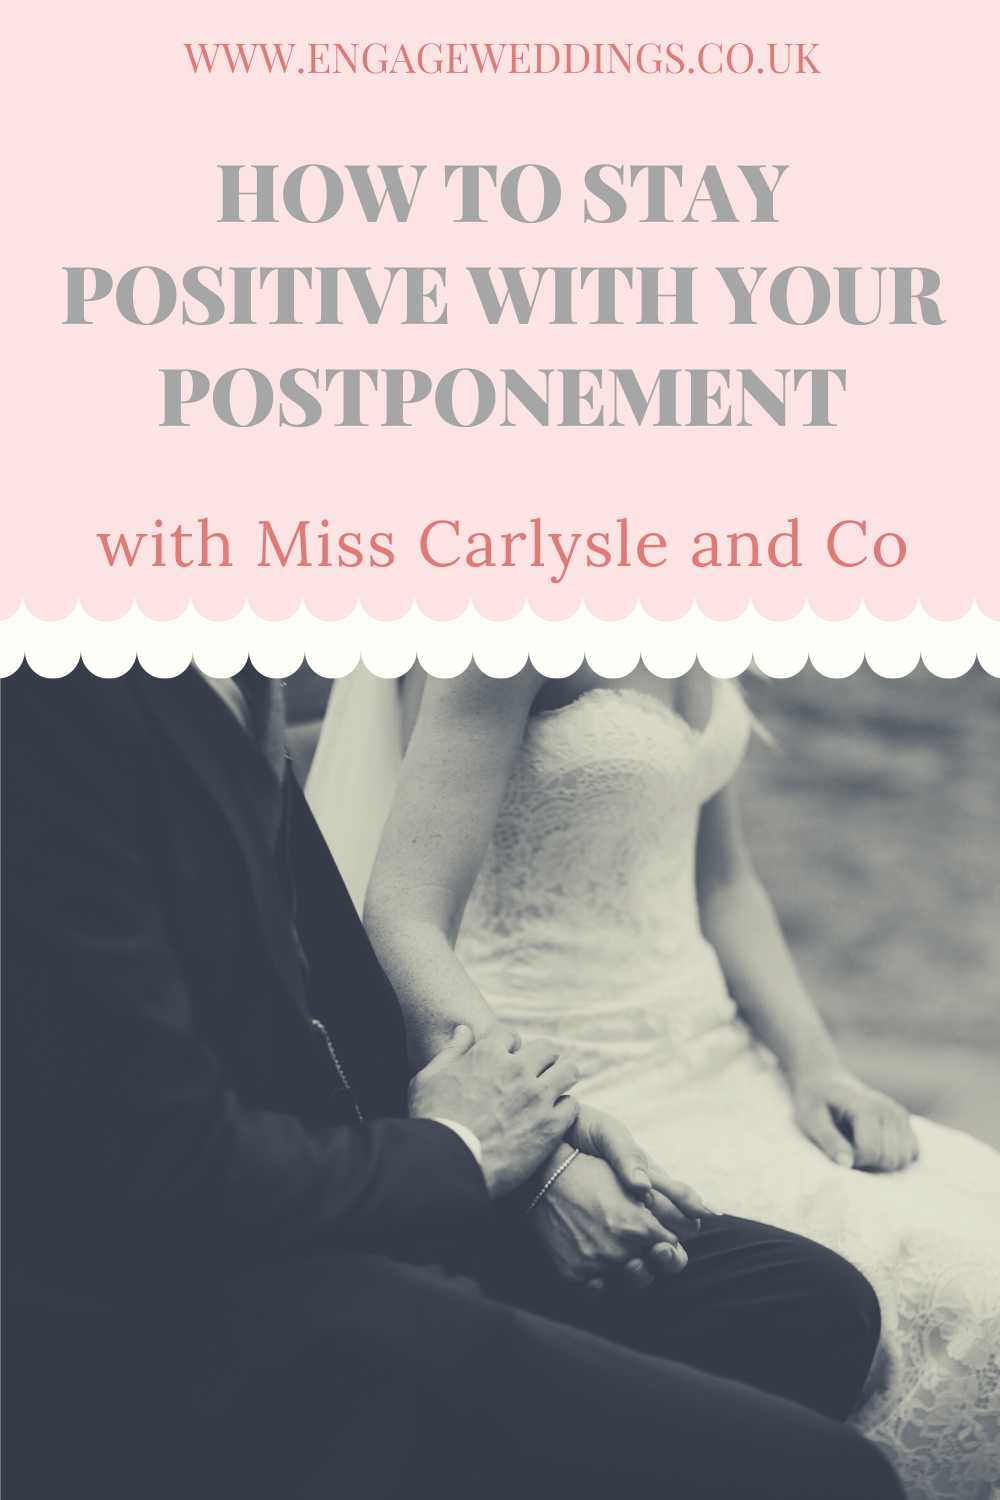 How to stay positive with your postponement_engageweddings.co.uk.png